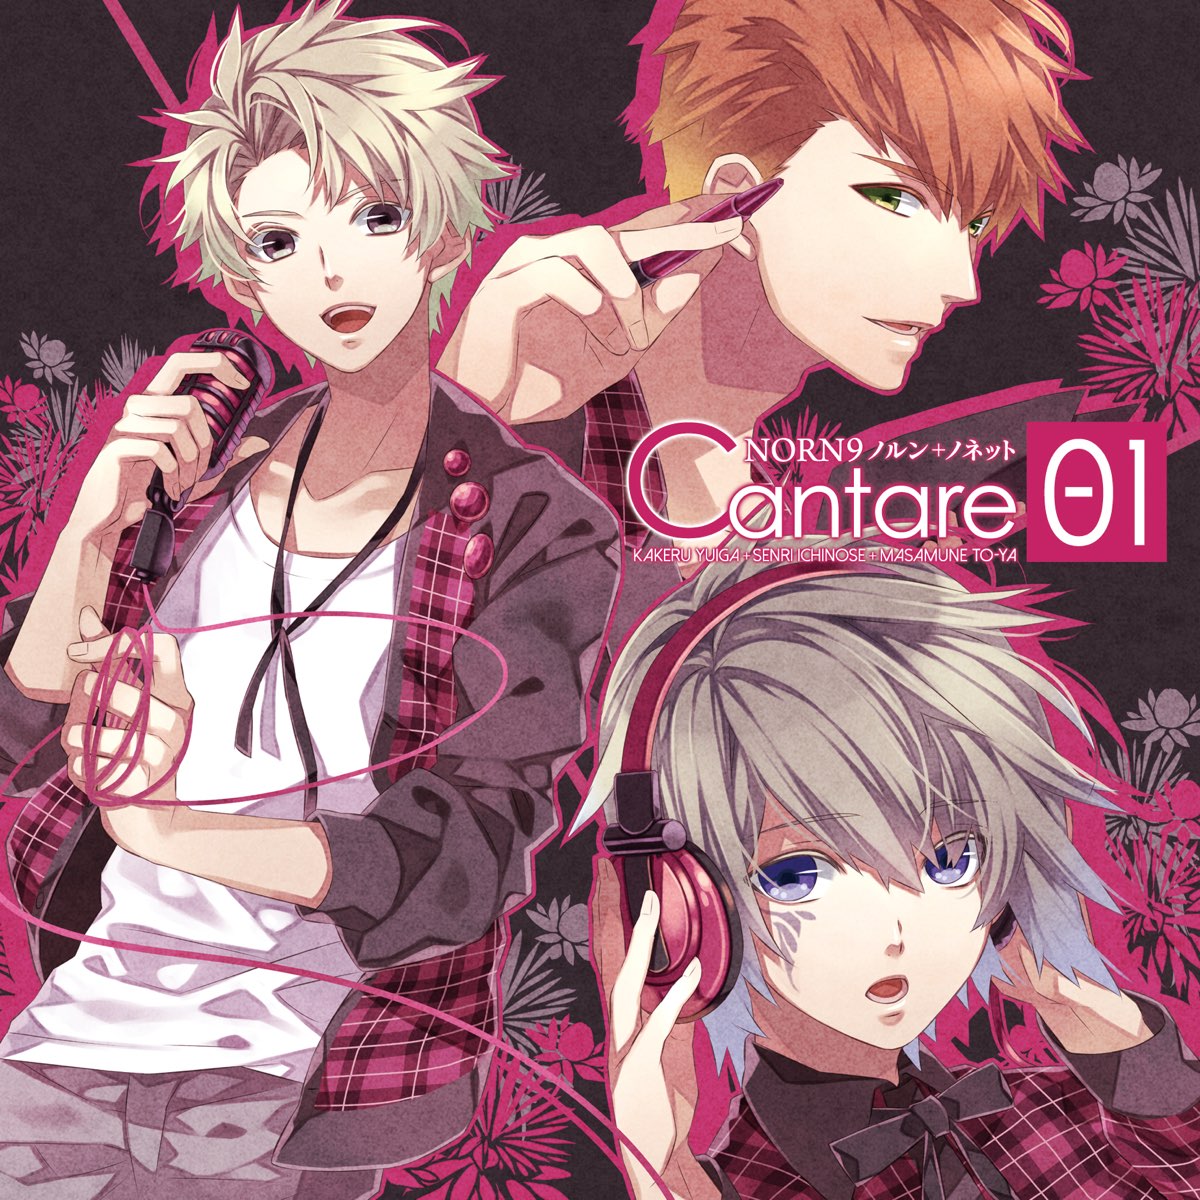 Norn9 ノルン ノネット Cantare Vol 1 By Various Artists On Apple Music